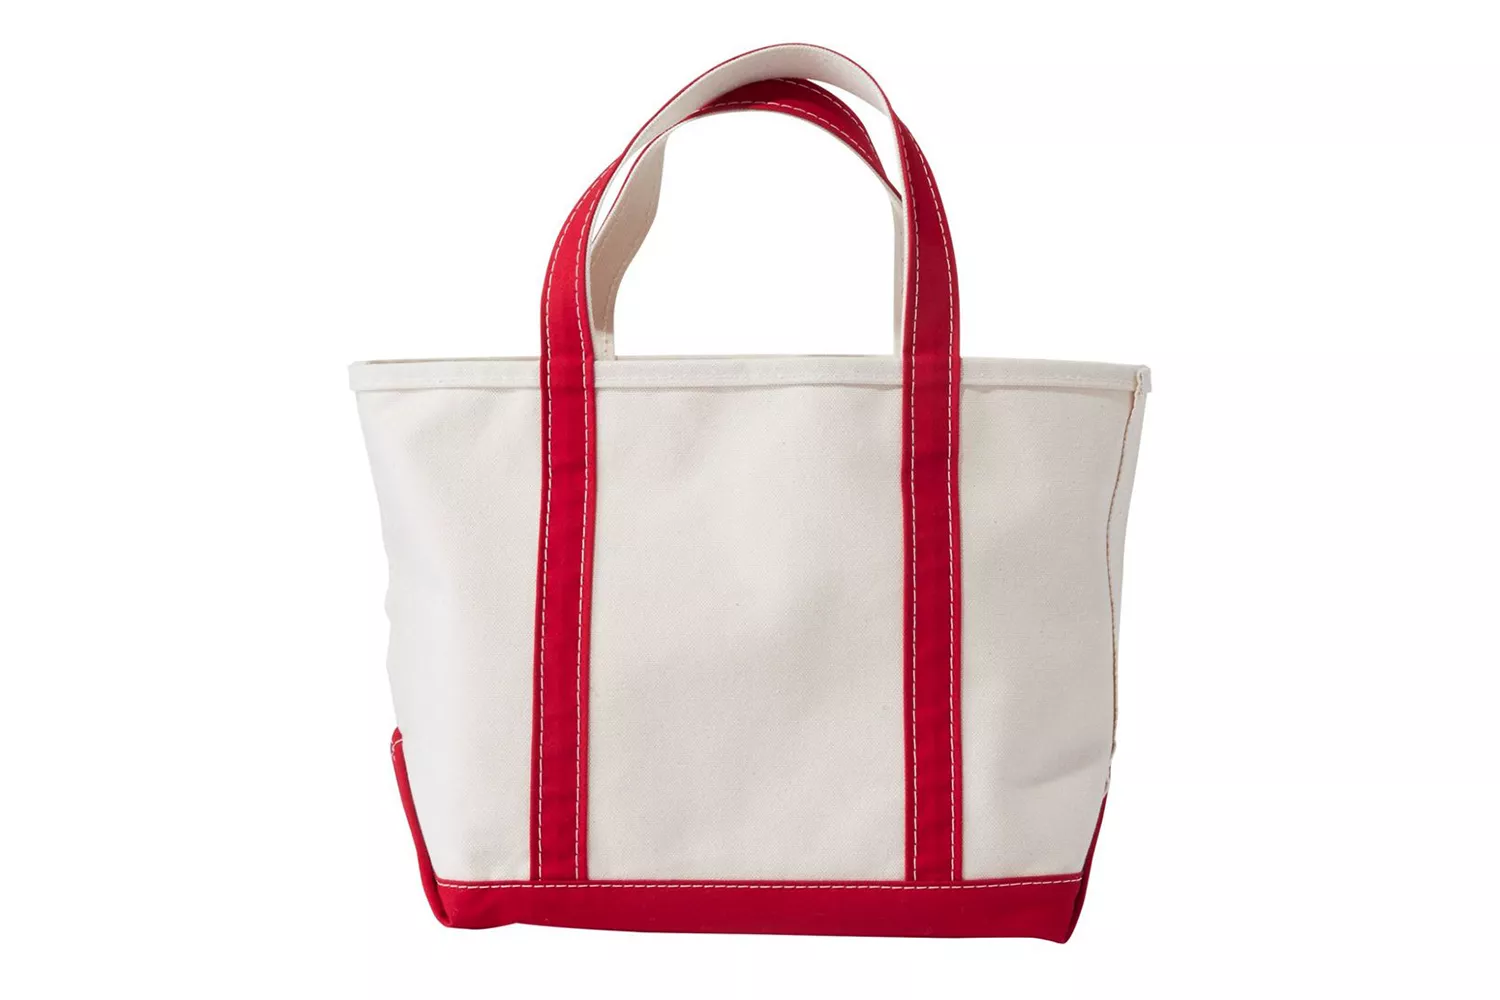 L.L. Bean Boat and Tote, Open-Top